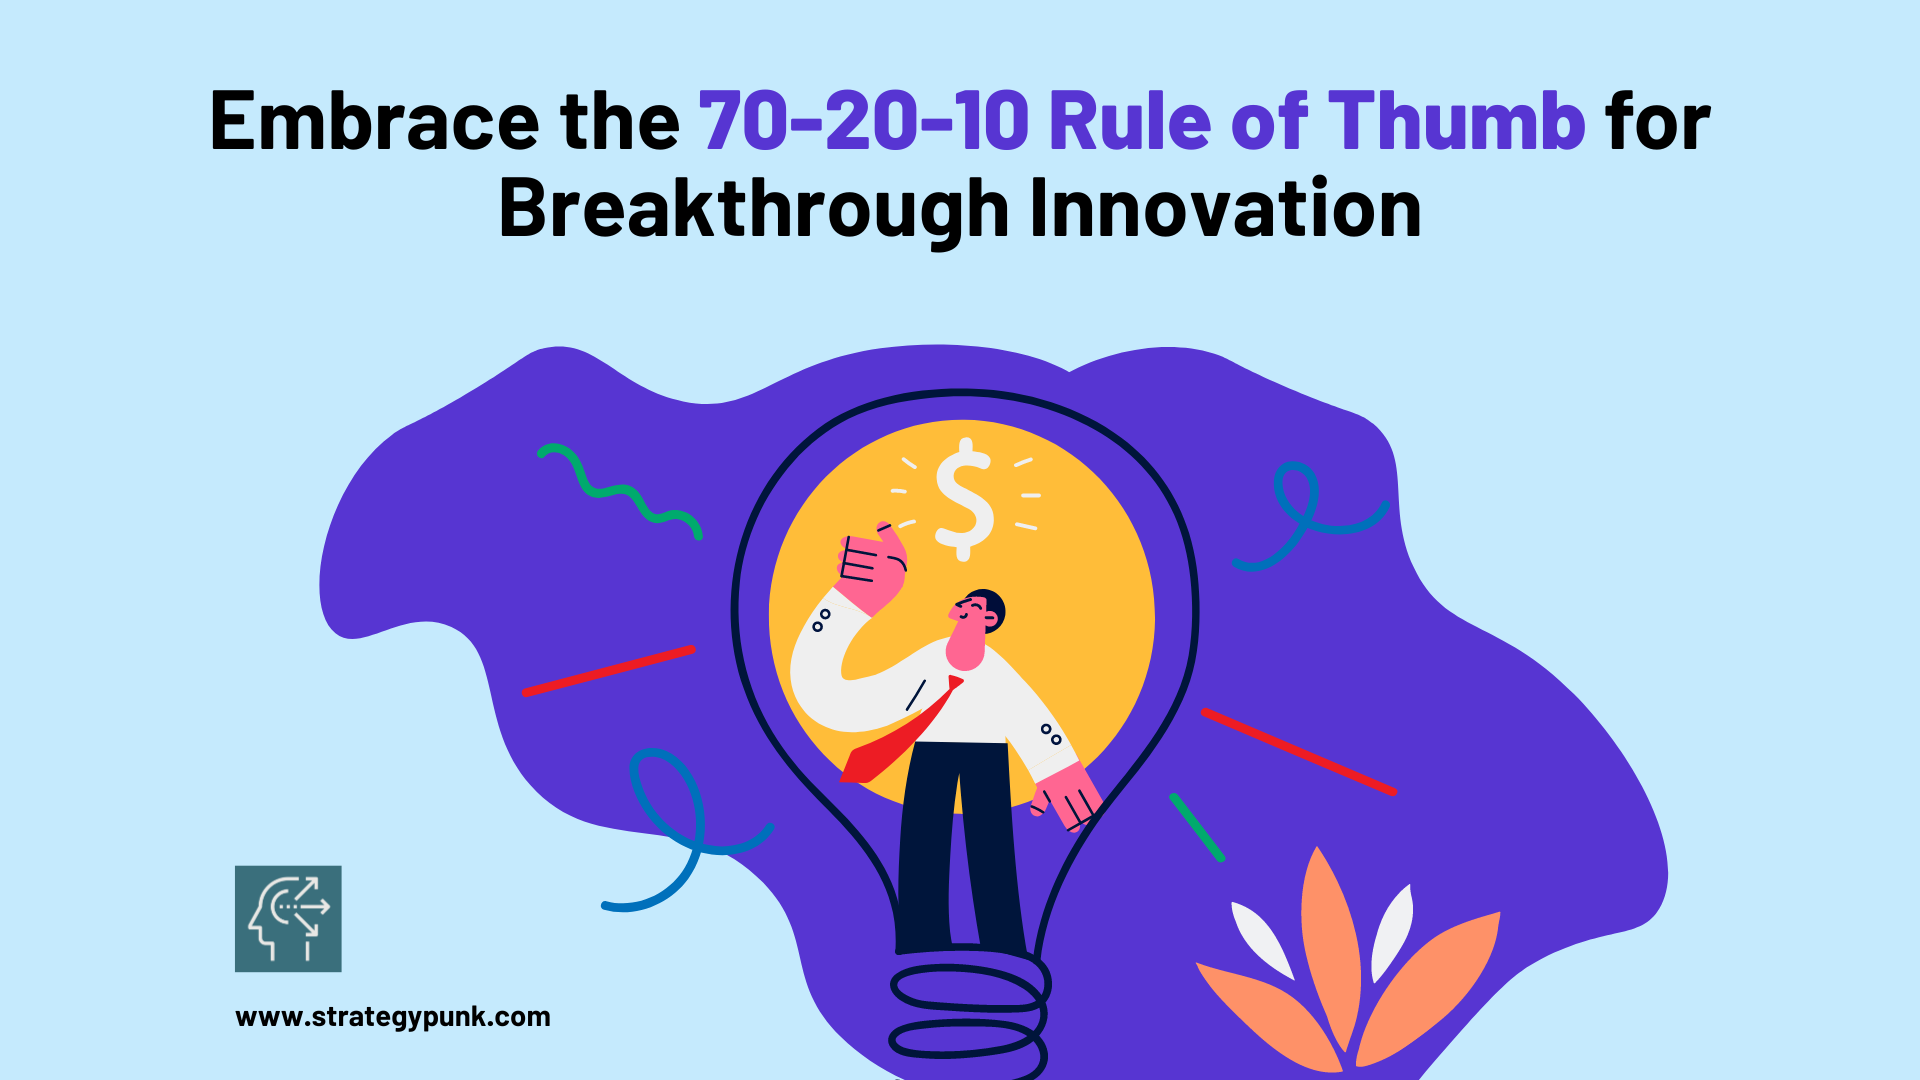 What is the 70 rule of thumb?